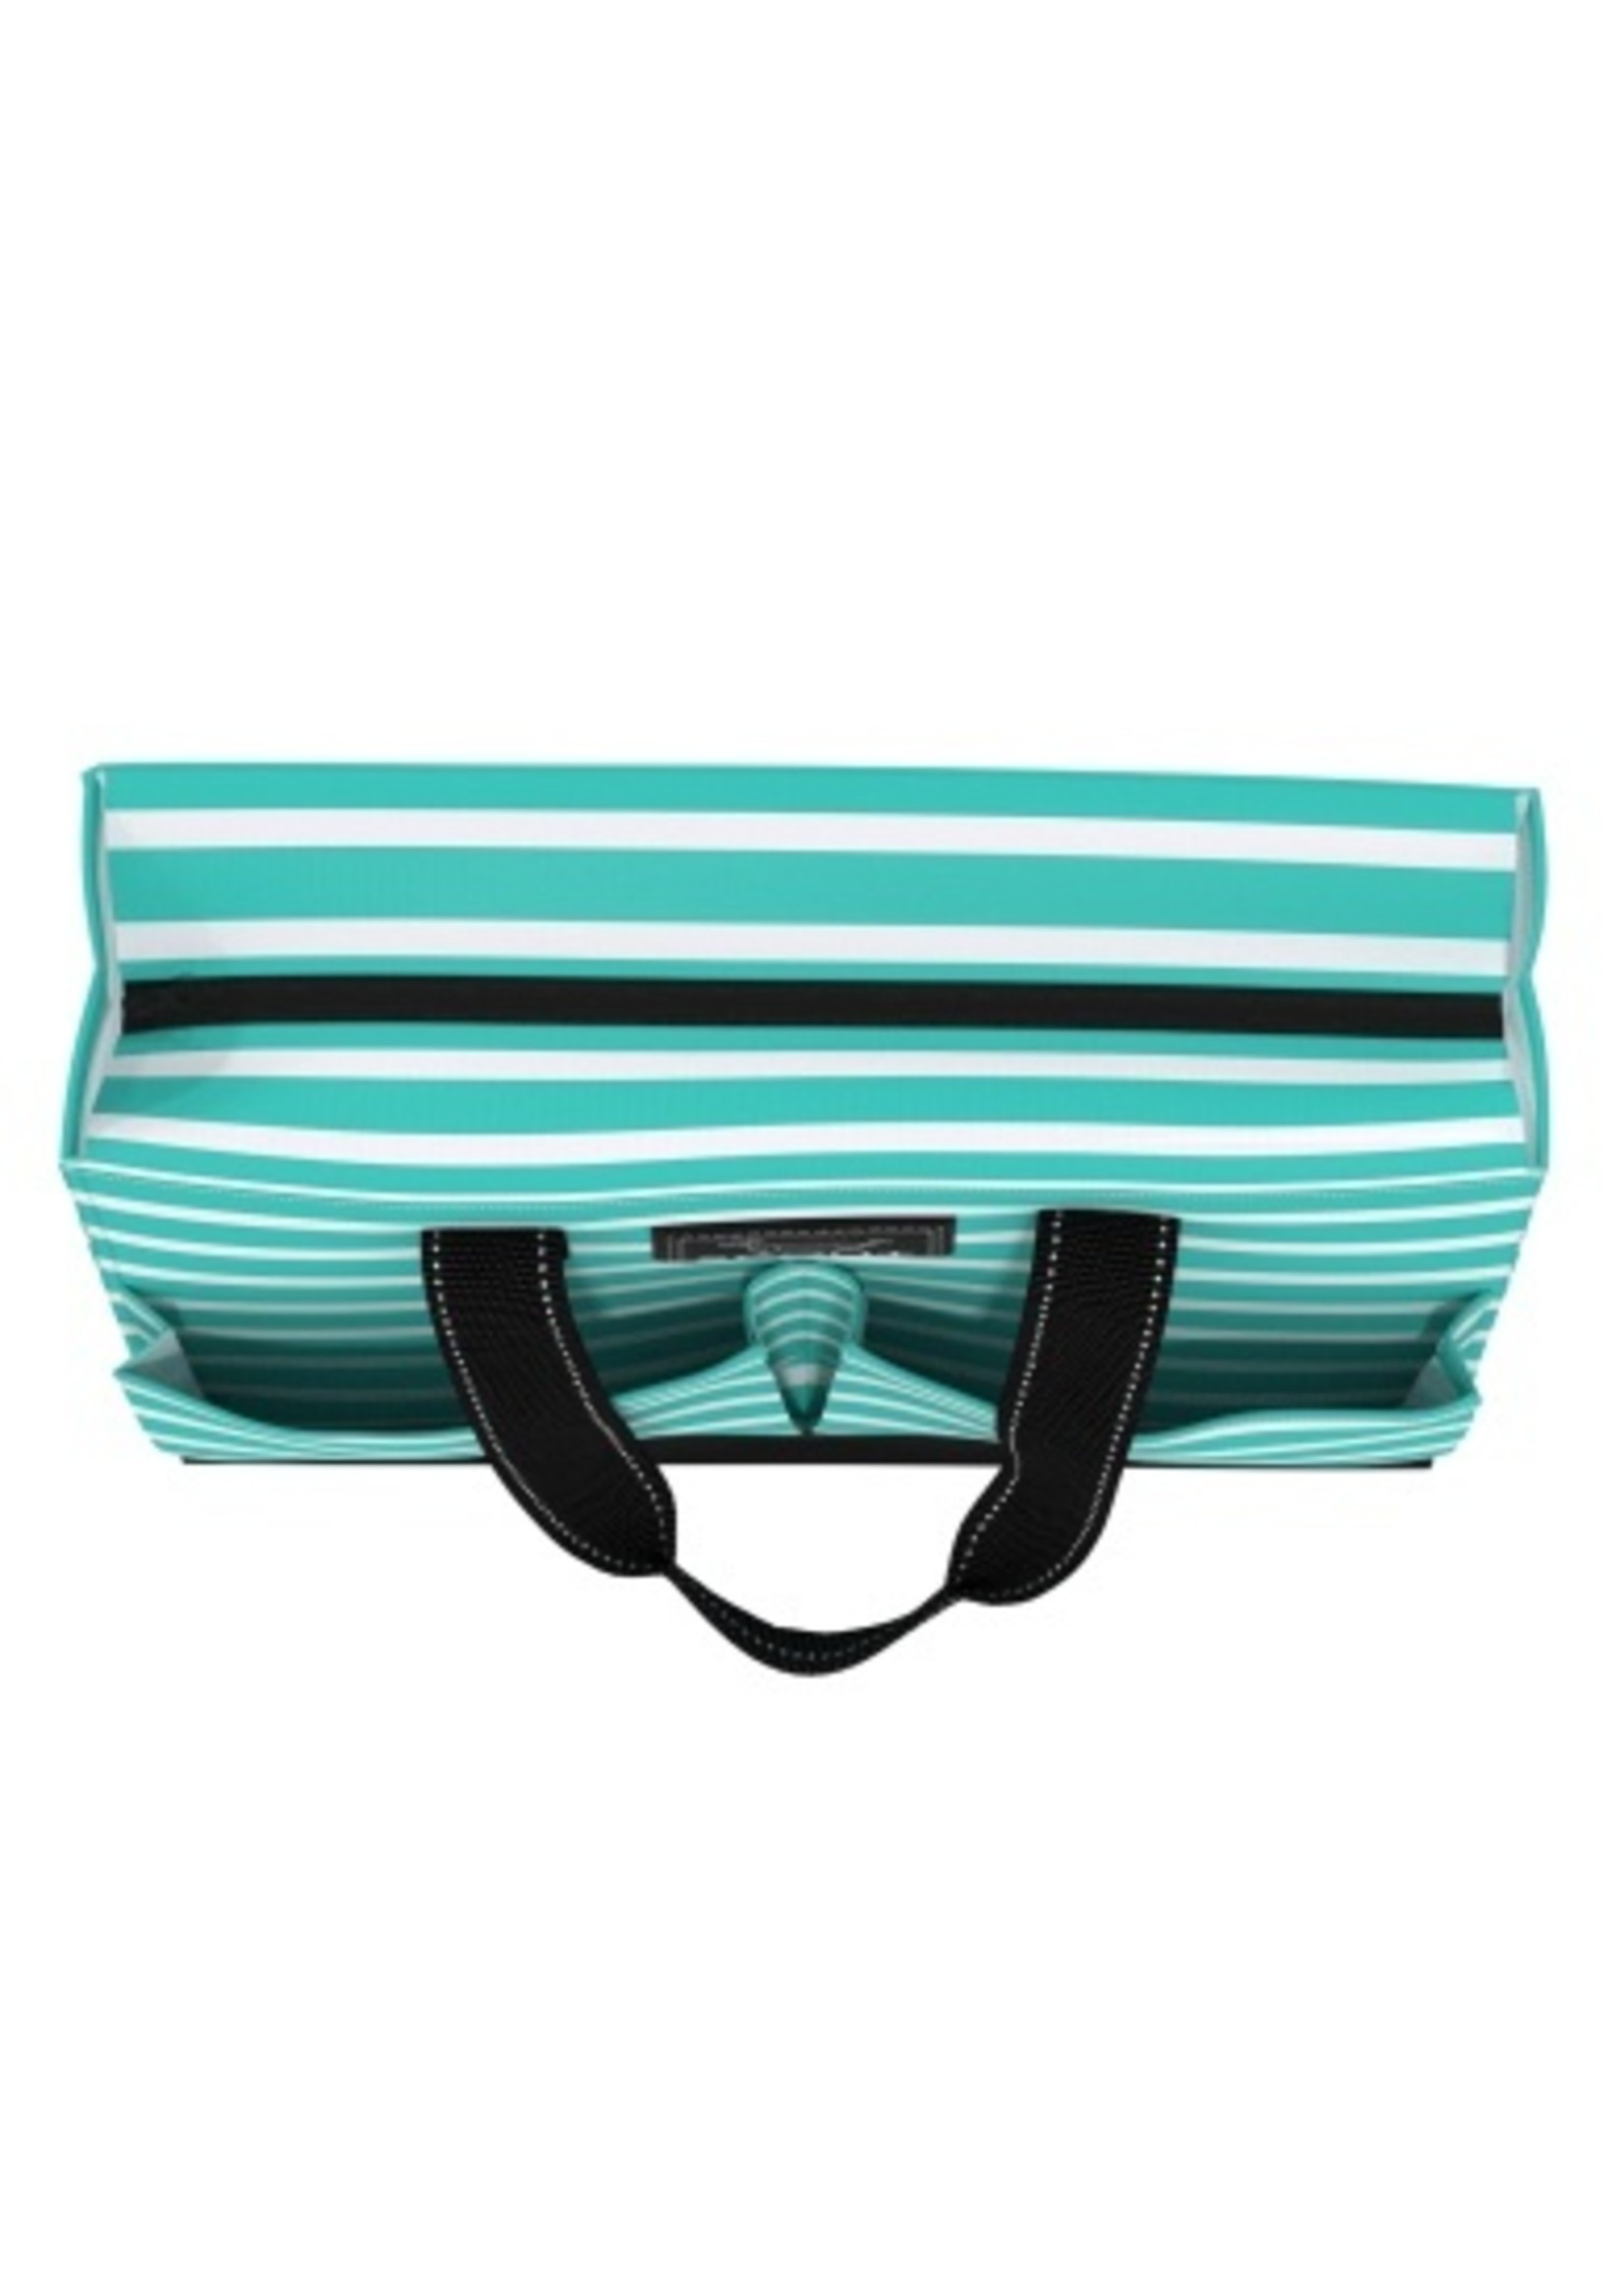 scout by bungalow Scout Uptown Girl Montauk Mint